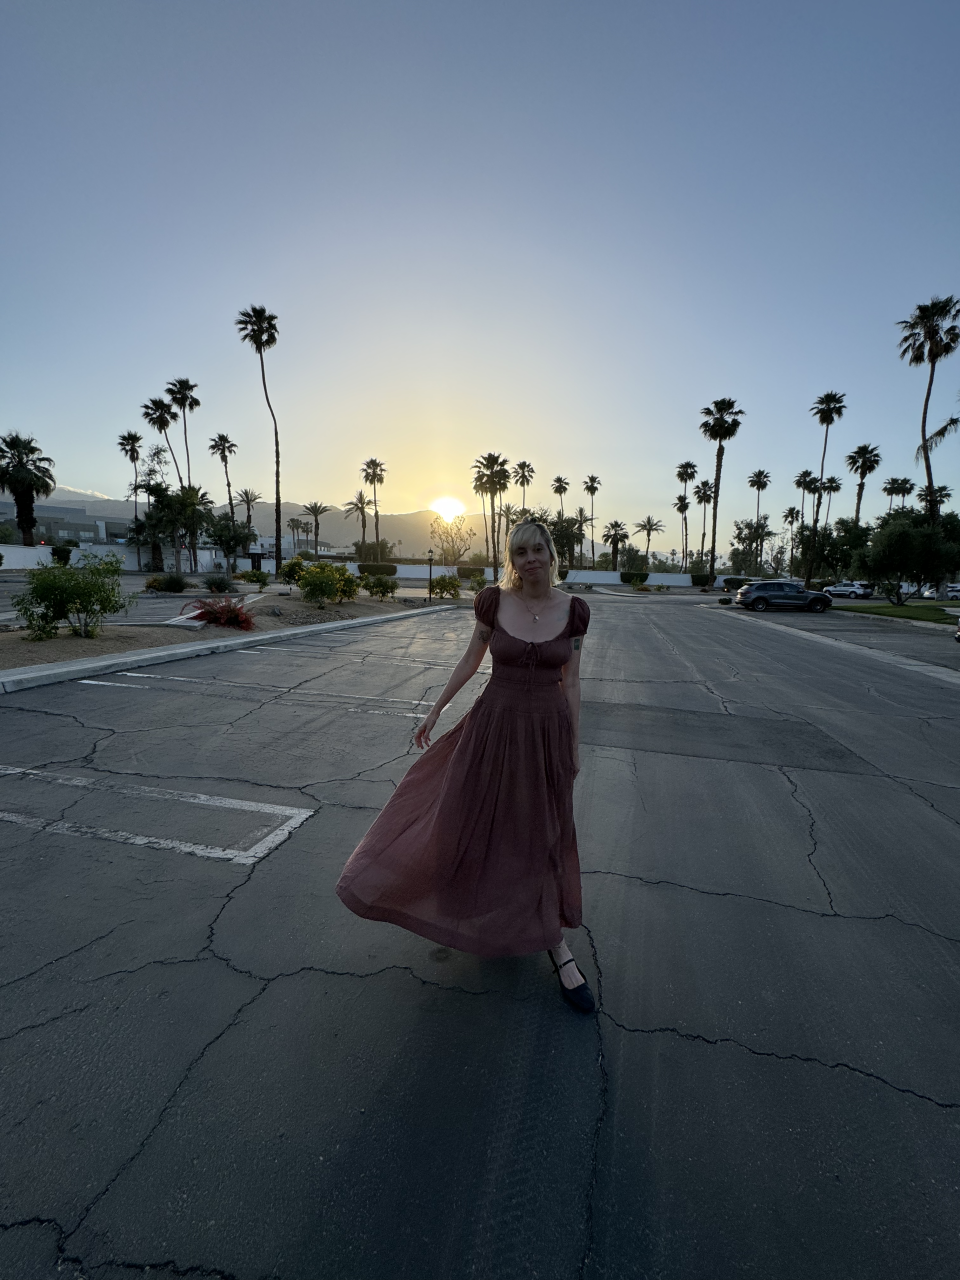 Person in a full-length dress standing in an empty parking lot with palm trees and sunset in the background